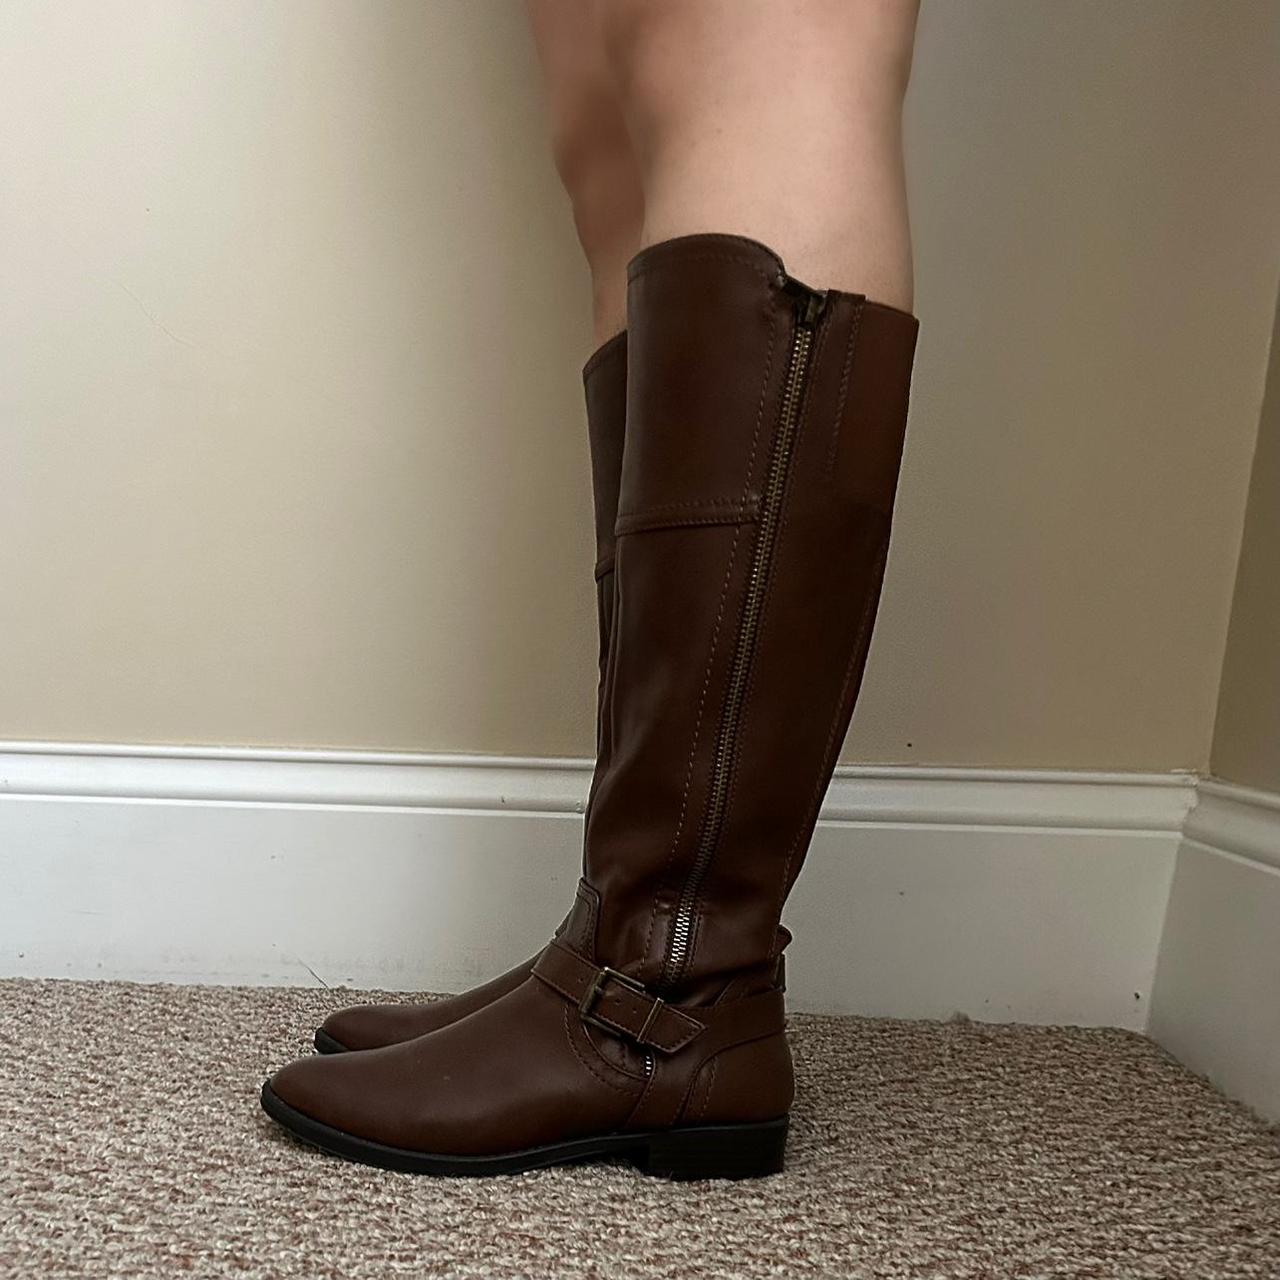 Target Women's Brown and Gold Boots (5)